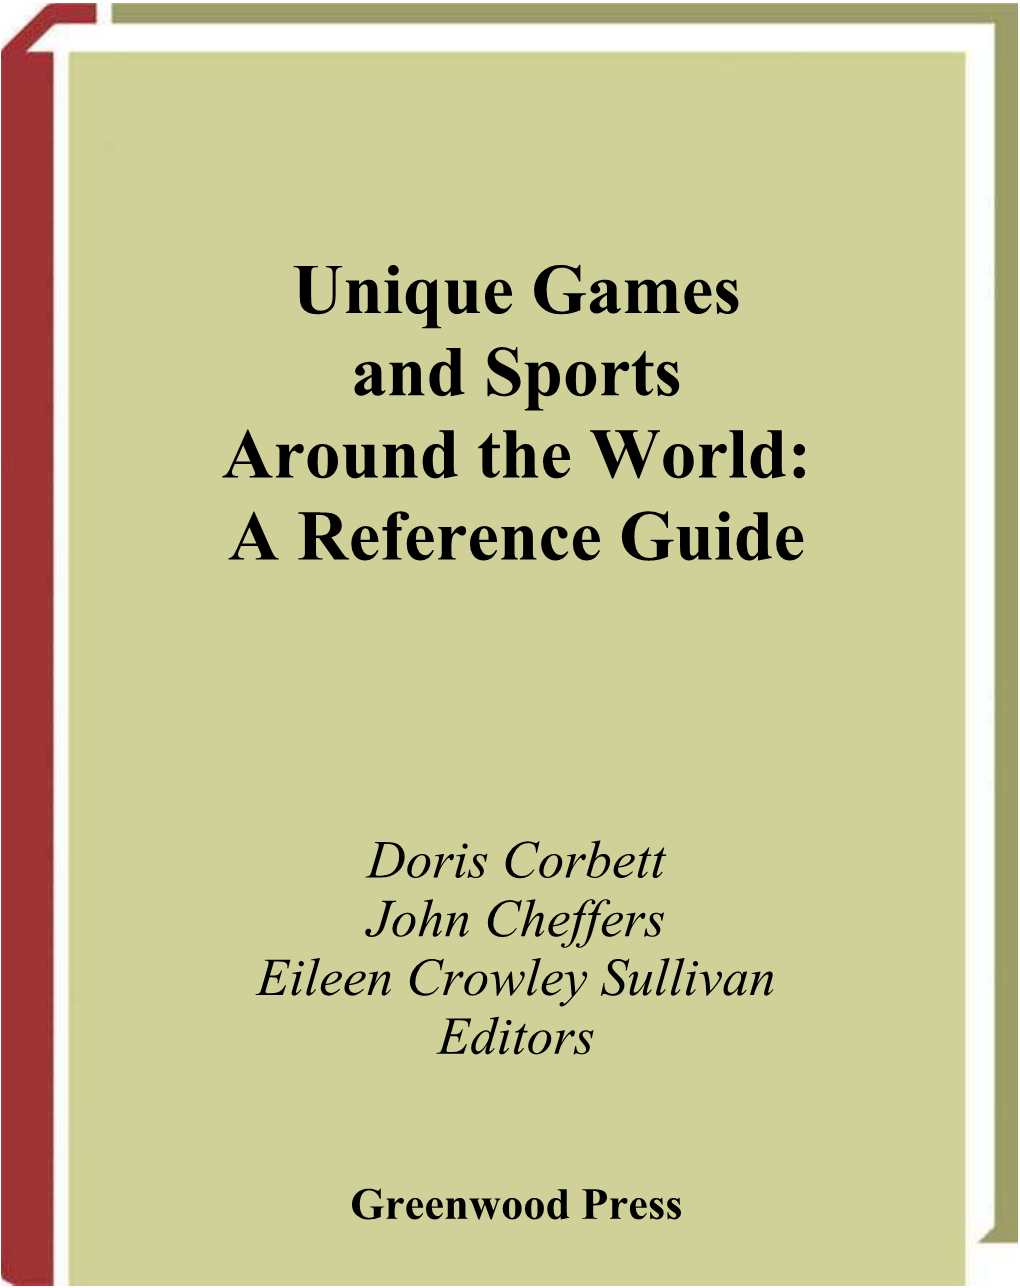 Unique Games and Sports Around the World: a Reference Guide